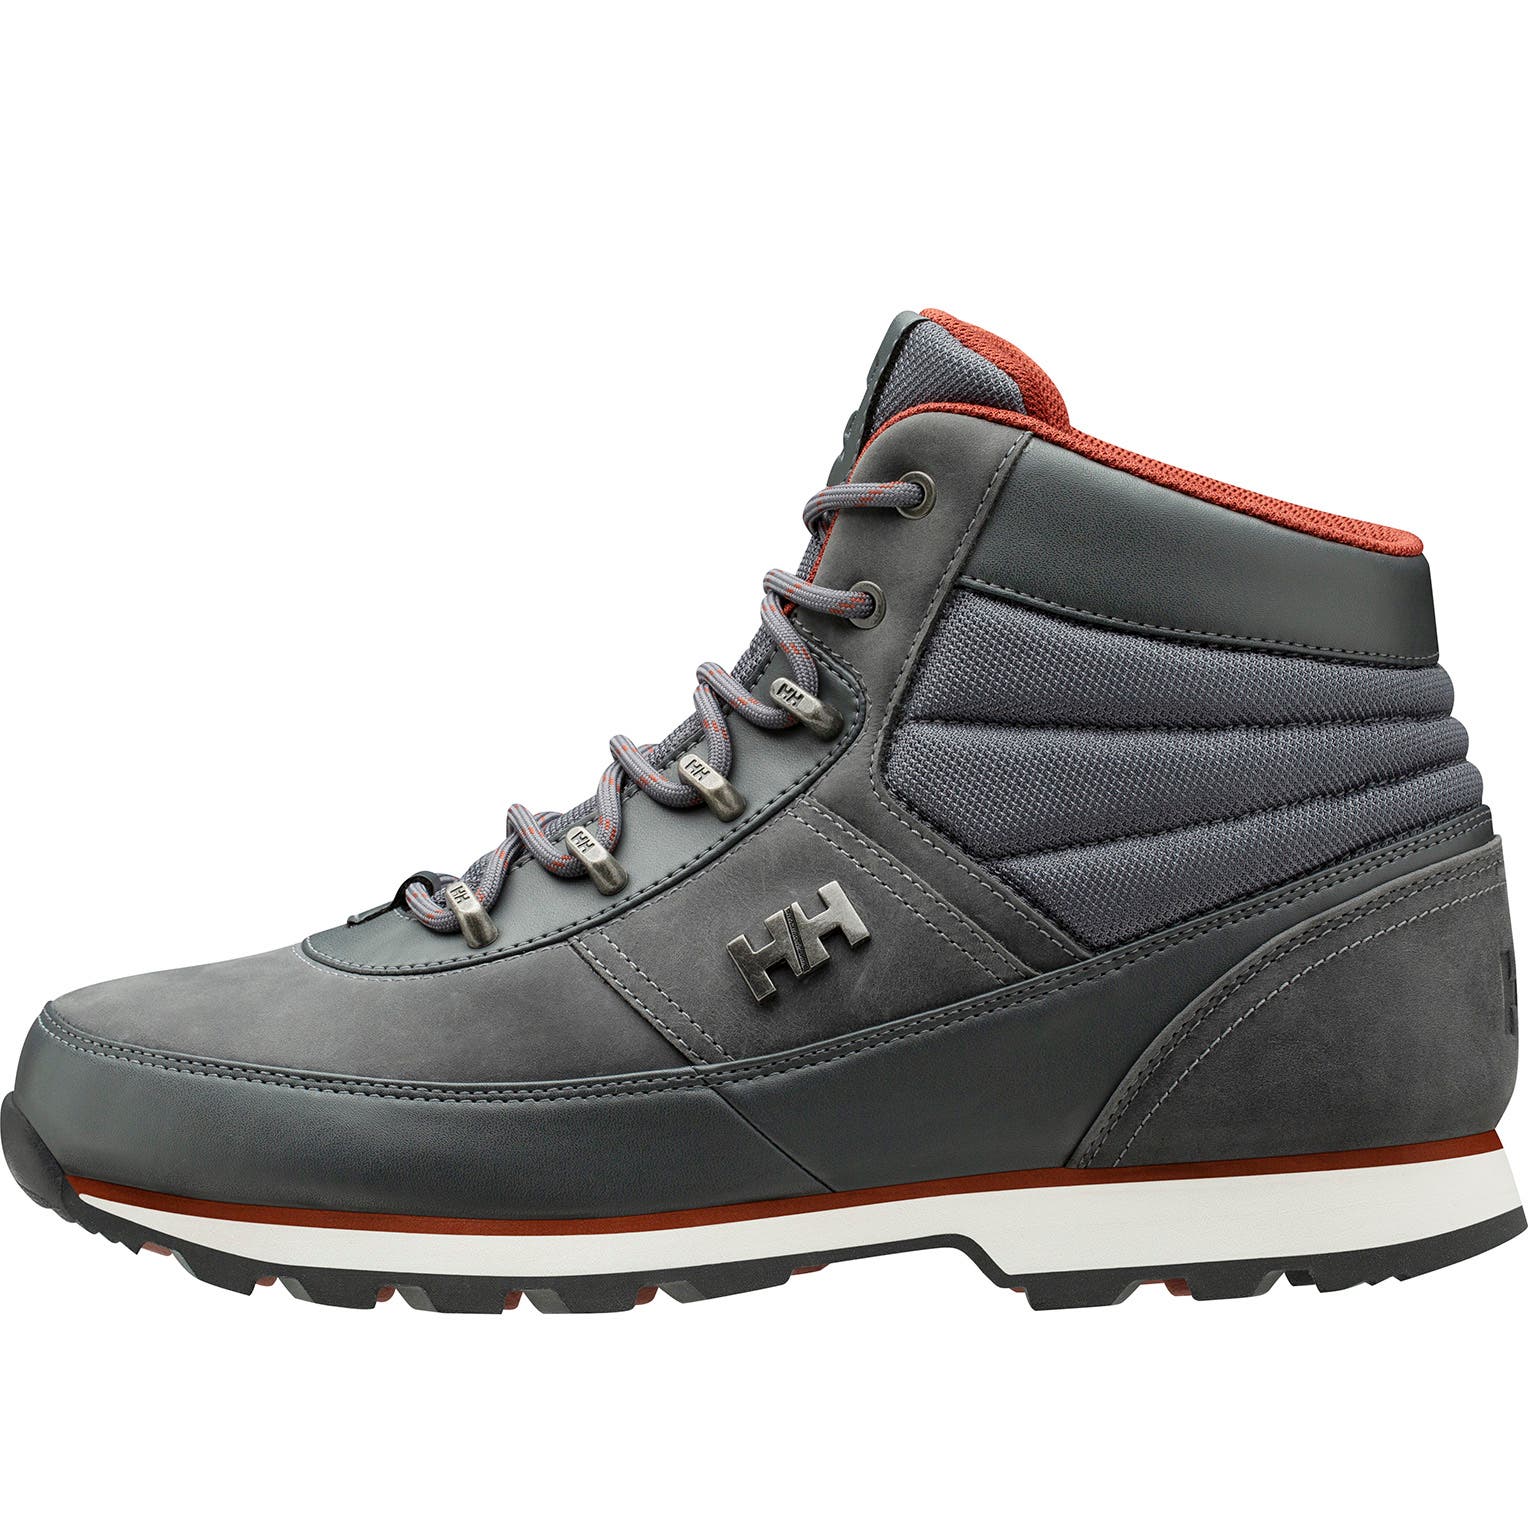 Helly Hansen Men's Woodlands Winter Boot in Ebony-Charcoal-Redwoo from the side